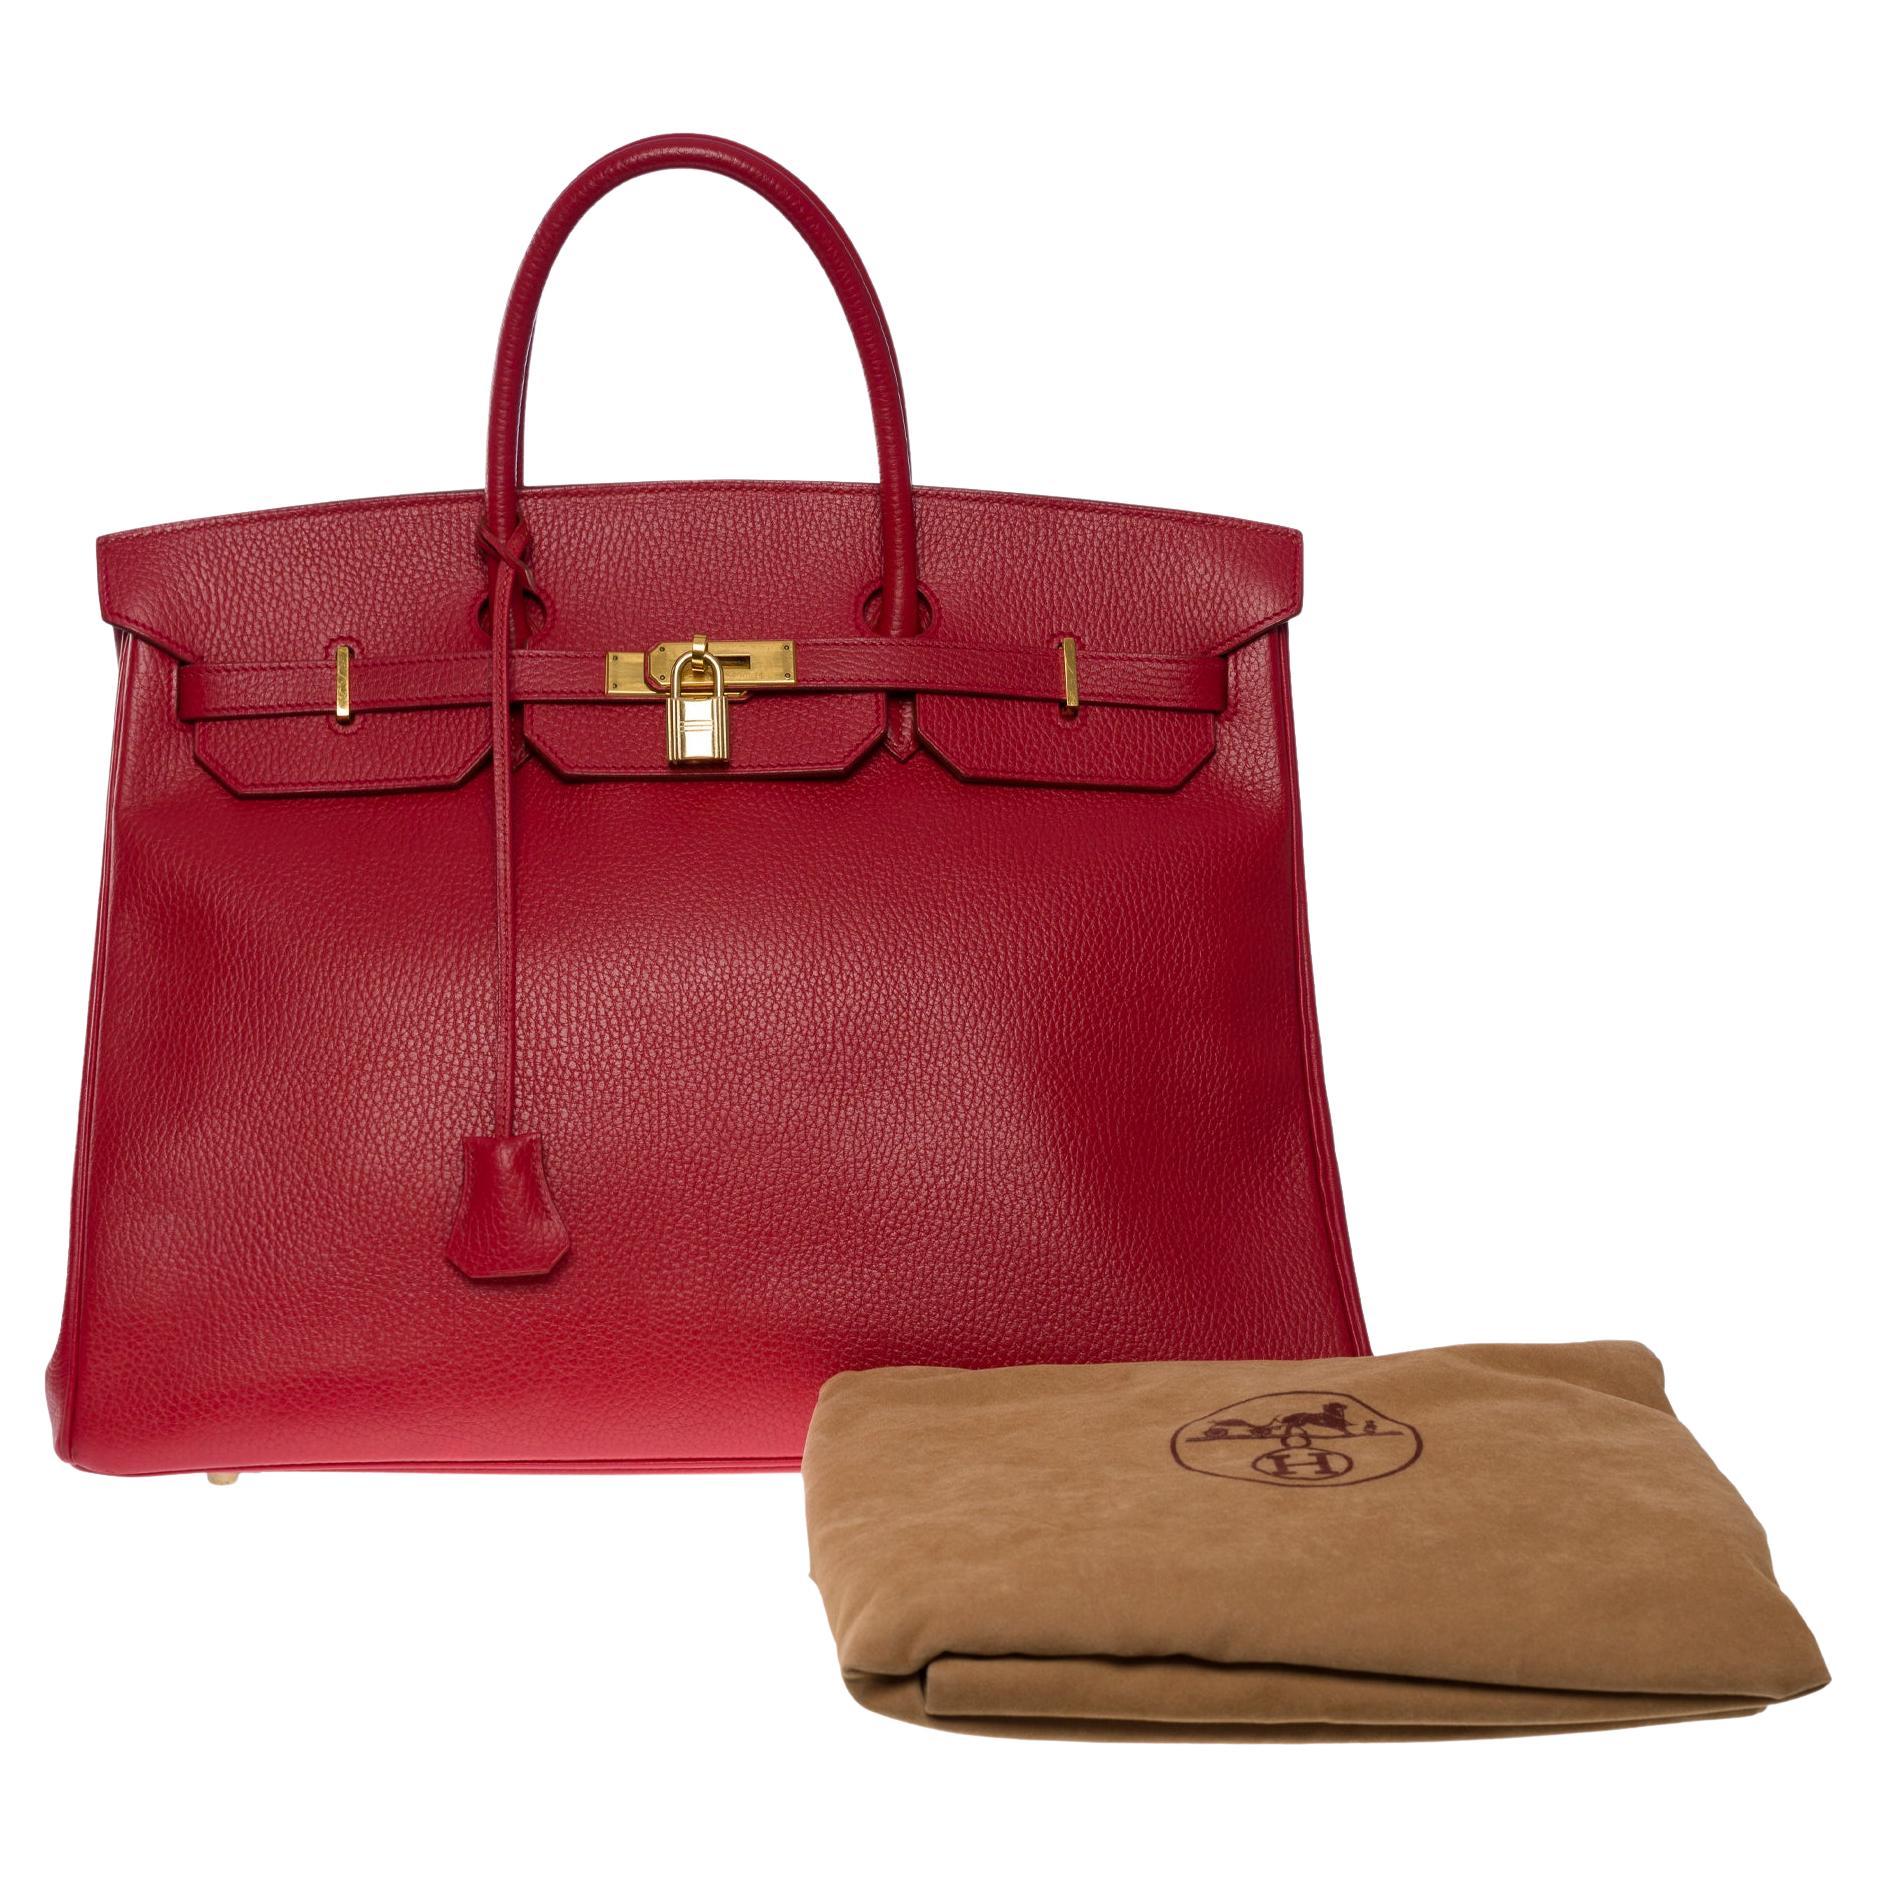 Rare & Collector Hermes Birkin 40cm handbag in Red Vache Ardennes leather, GHW For Sale